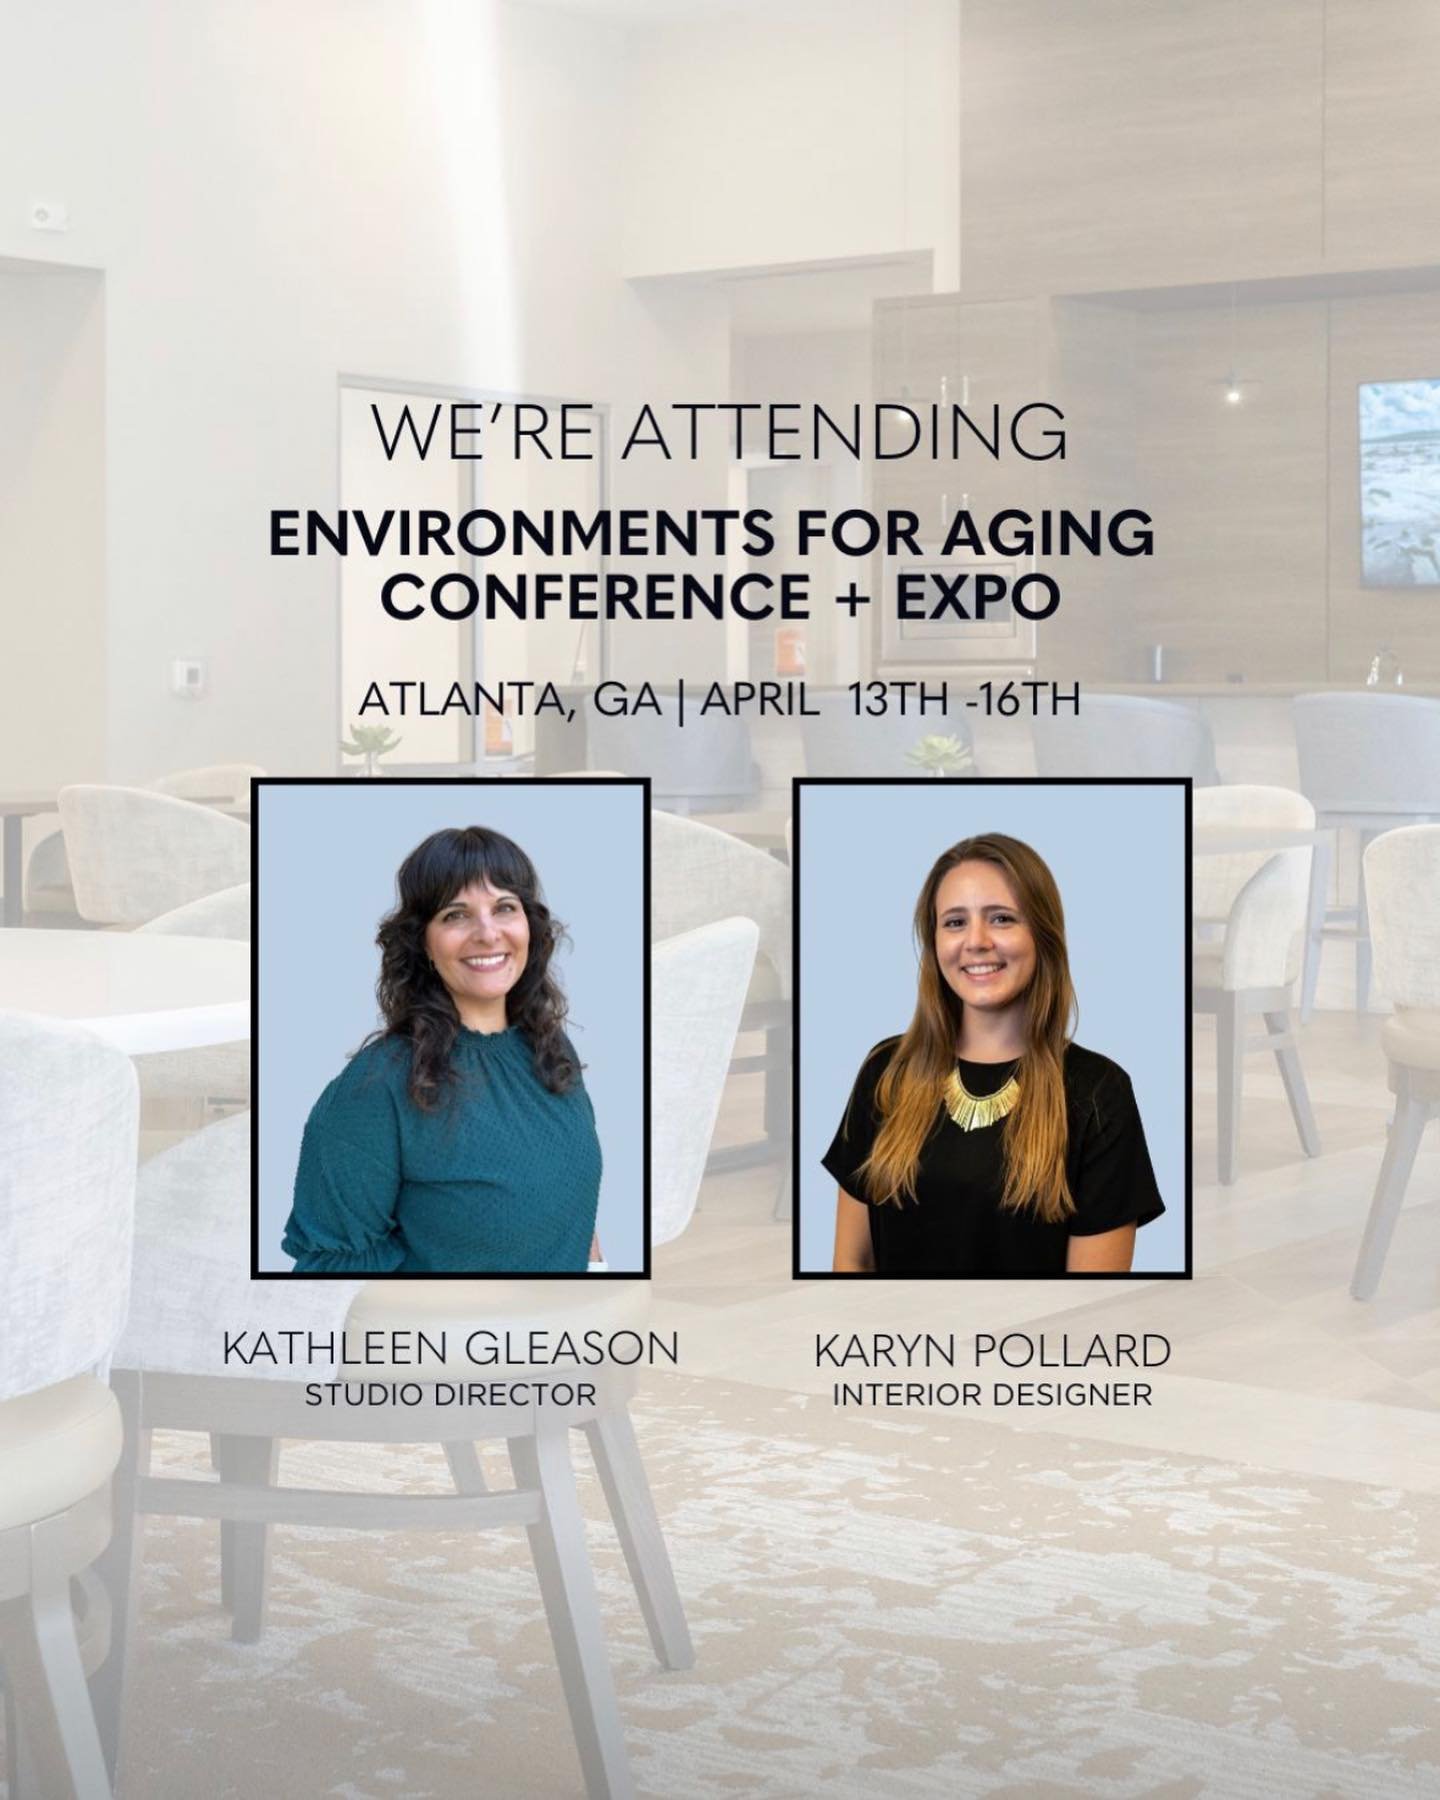 Kathleen and Karyn are attending the Environments for Aging Conference + Expo on April 13th-16th in Atlanta, GA! 

Are you attending or in the Atlanta area? We&rsquo;d love to meet up with you! Reach out to us by emailing kathleen@warnerdesign.com. ?